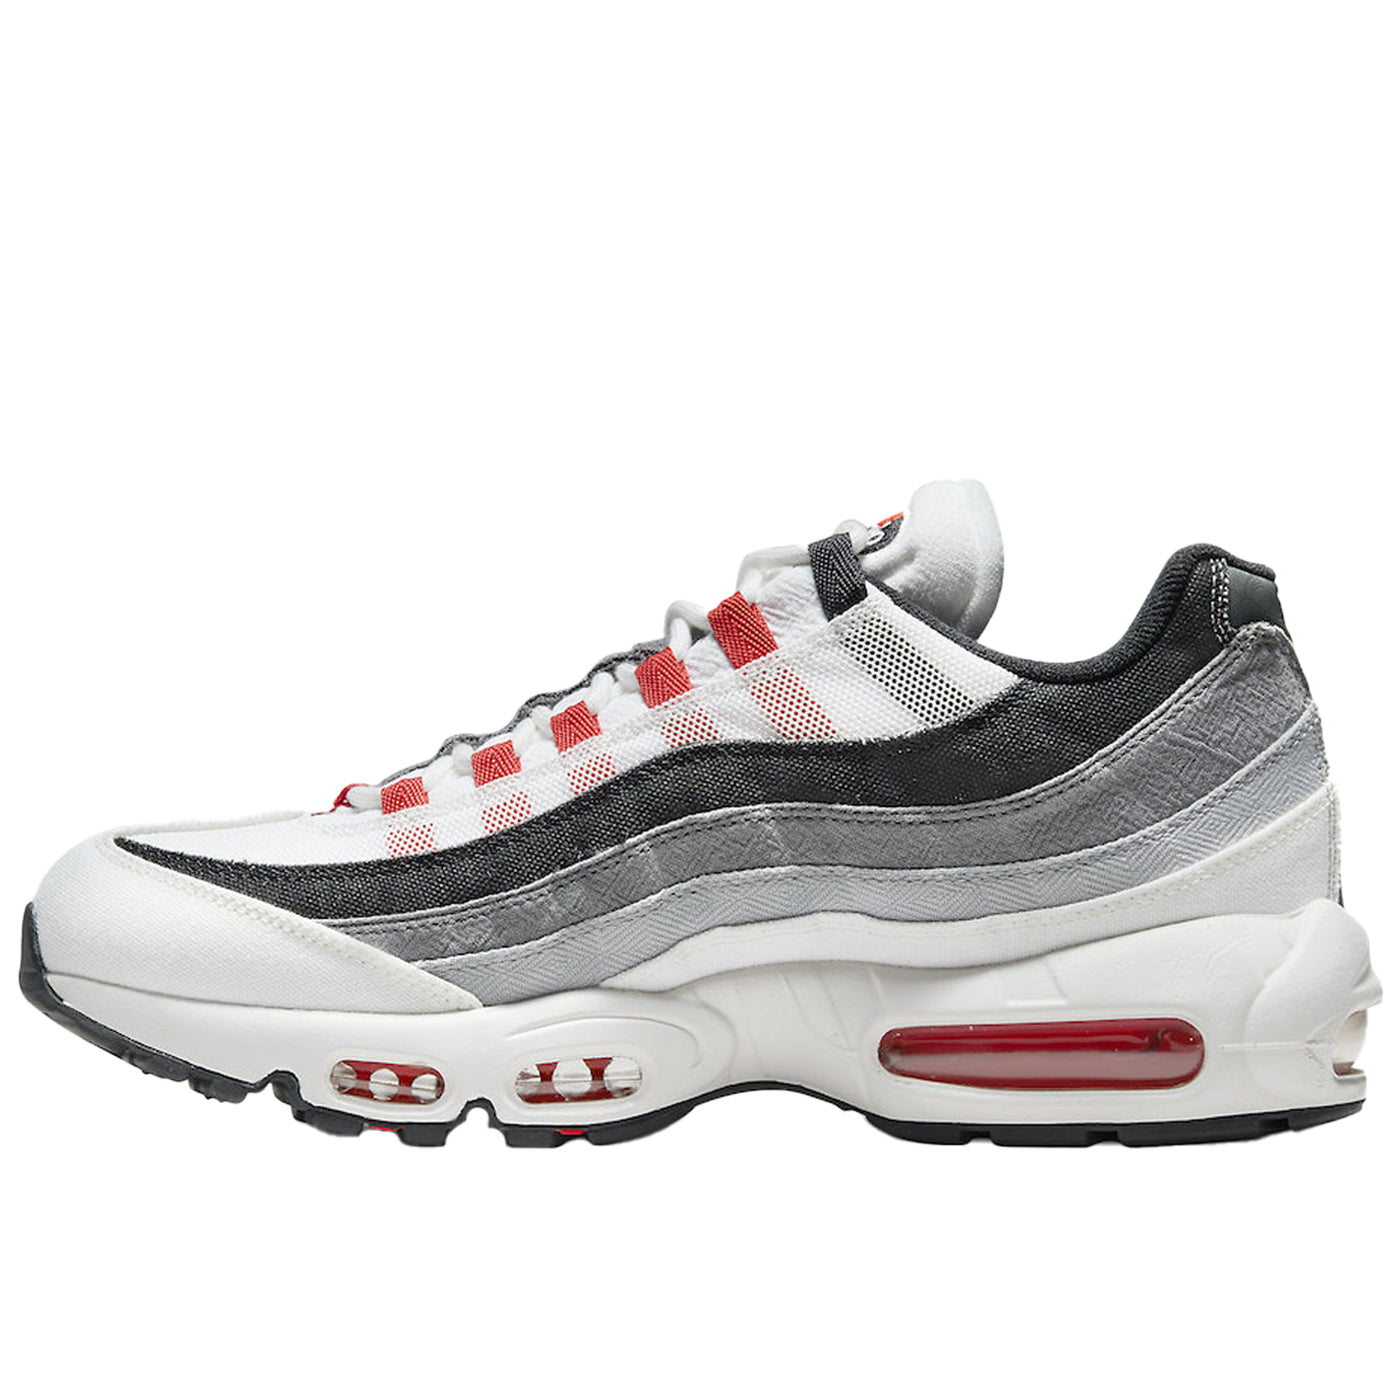 Nike Air Max 95 "Japan", Summit White/Chile Red-Off Noir